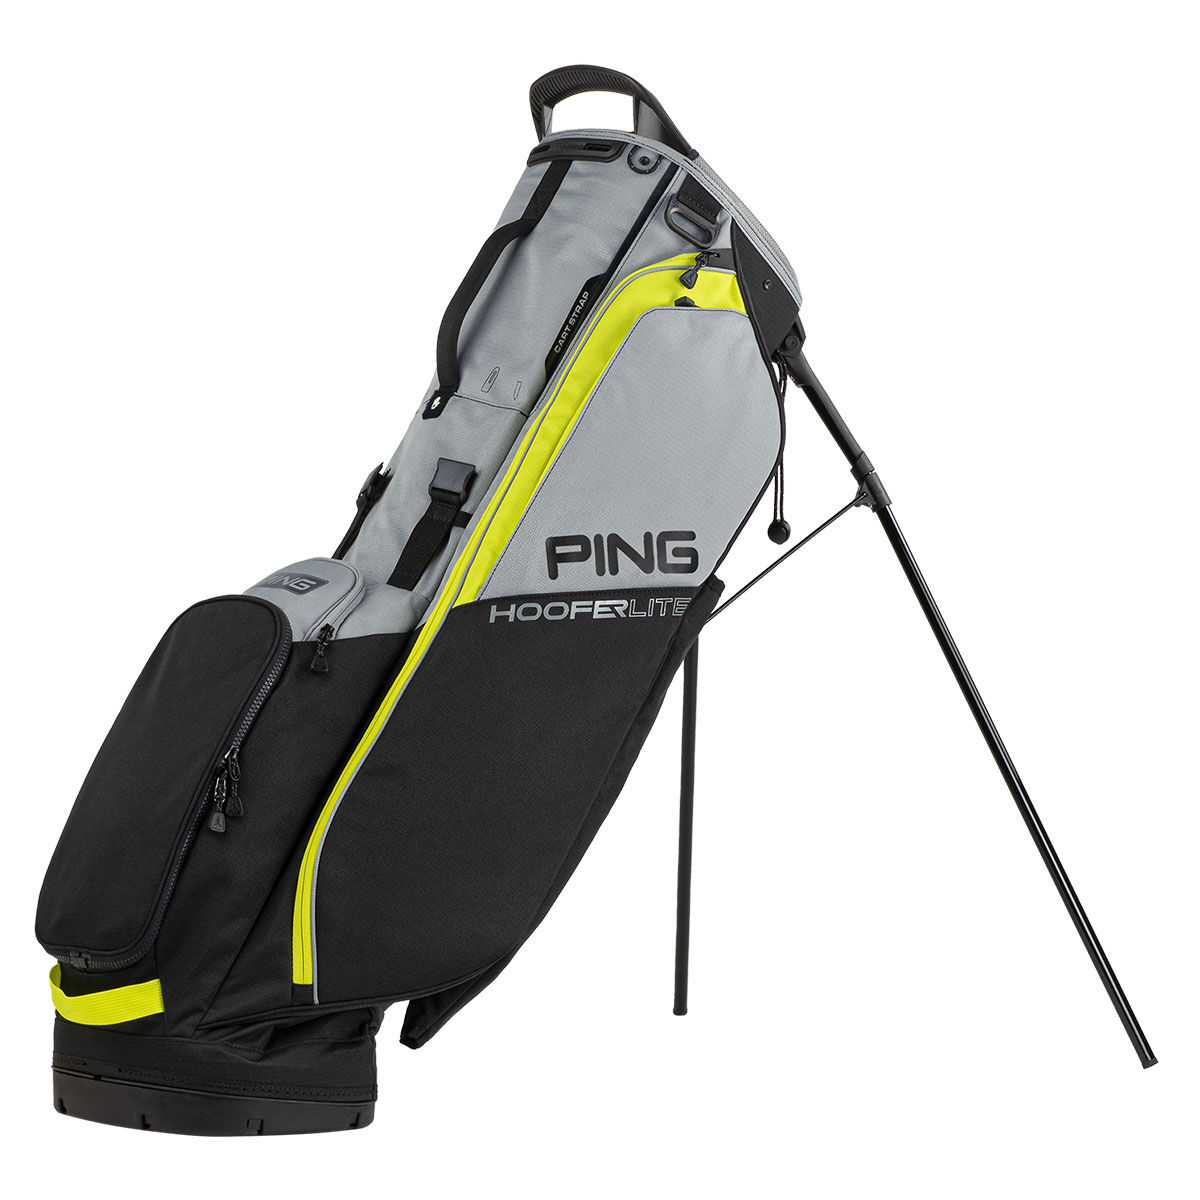 PING Hoofer Lite 231 Golf Stand Bag, Black/iron/neon yellow, One Size | American Golf von Ping